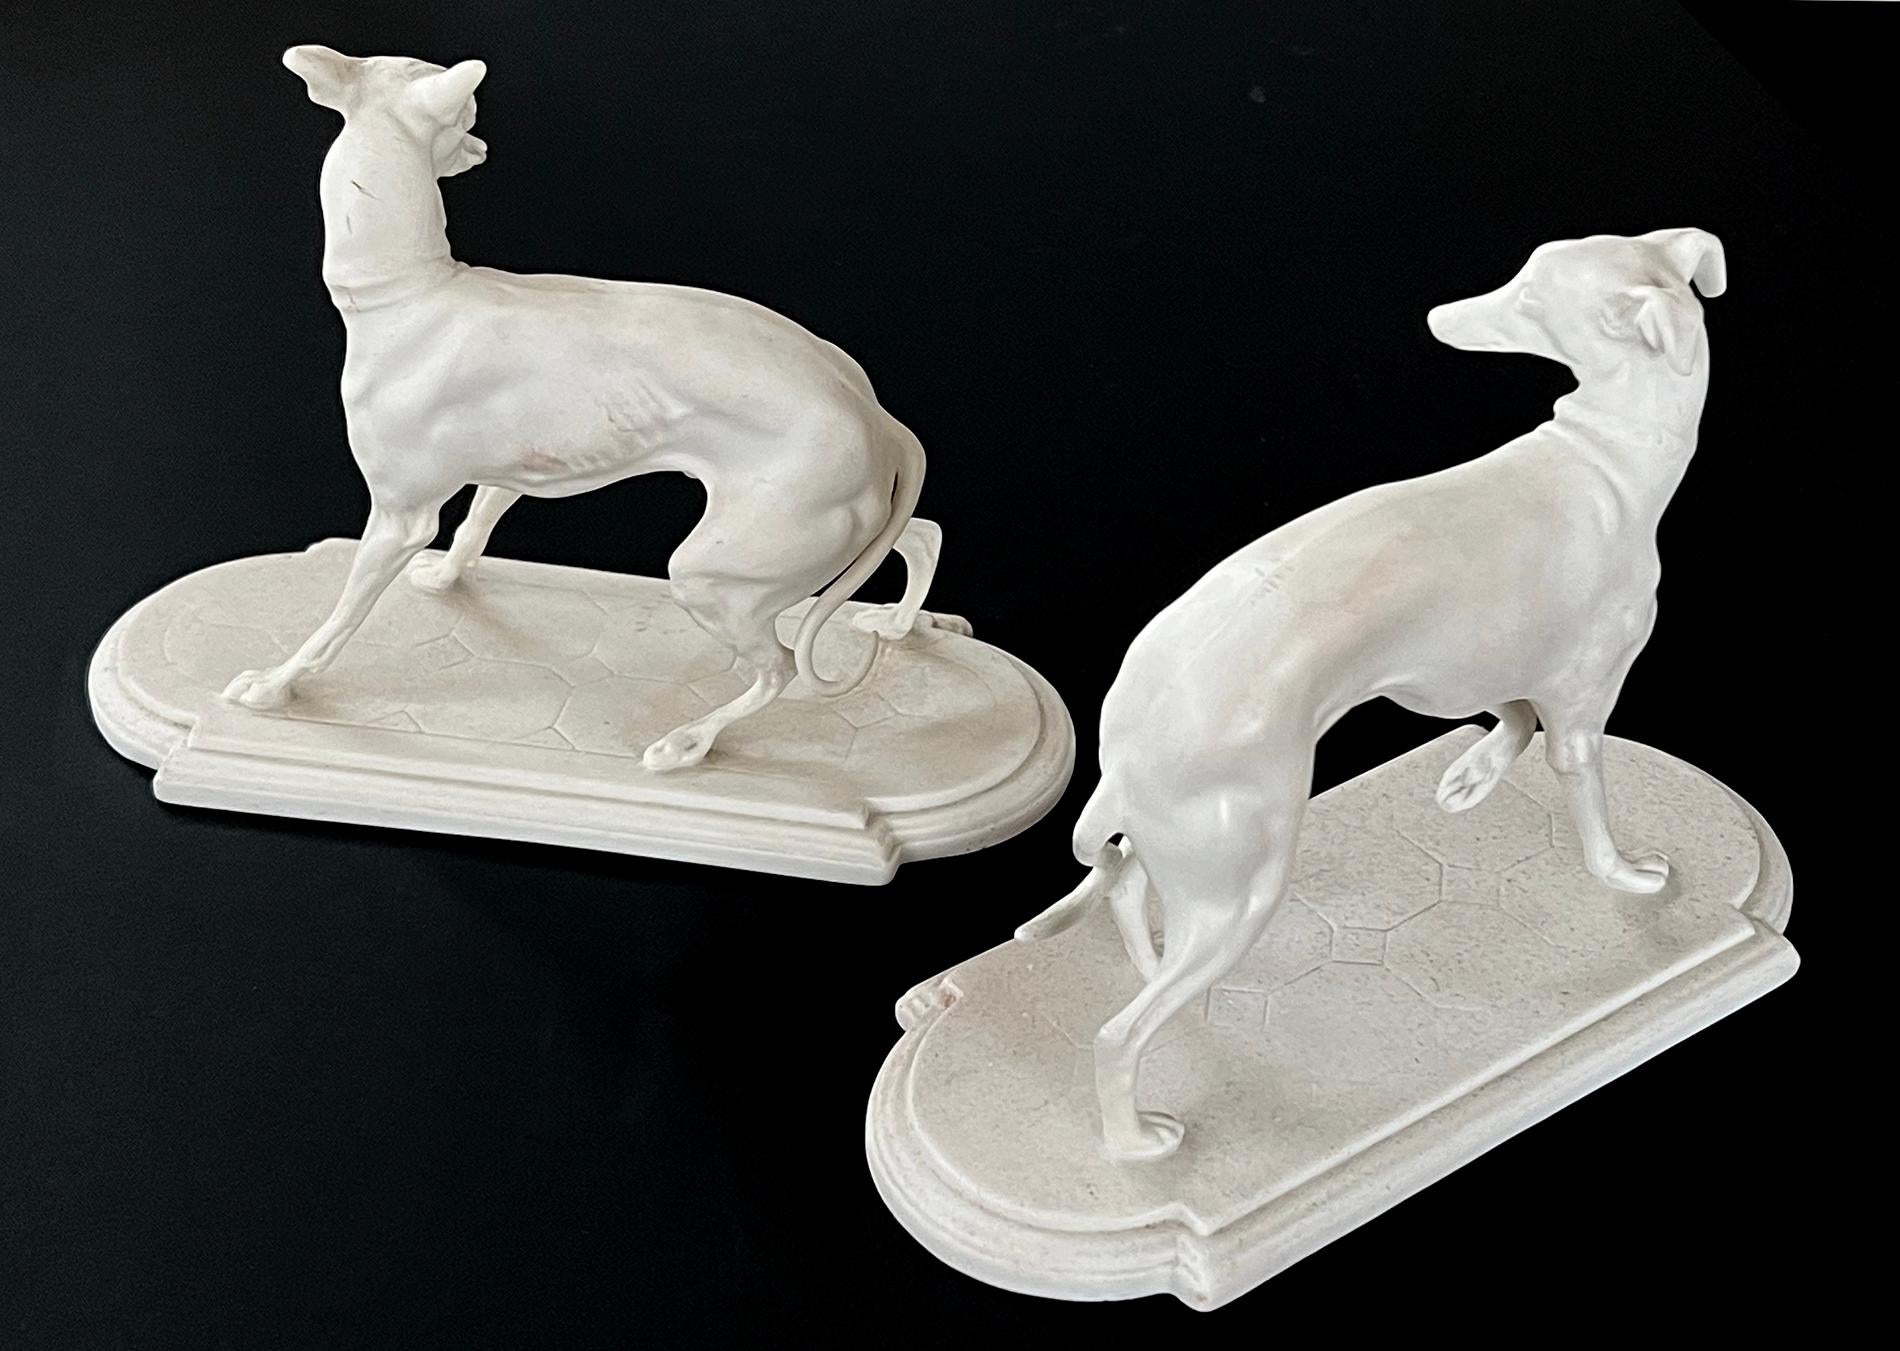 Unglazed A Rare Pair of Bisque Porcelain Whippet Figurines by Boehm Studios For Sale